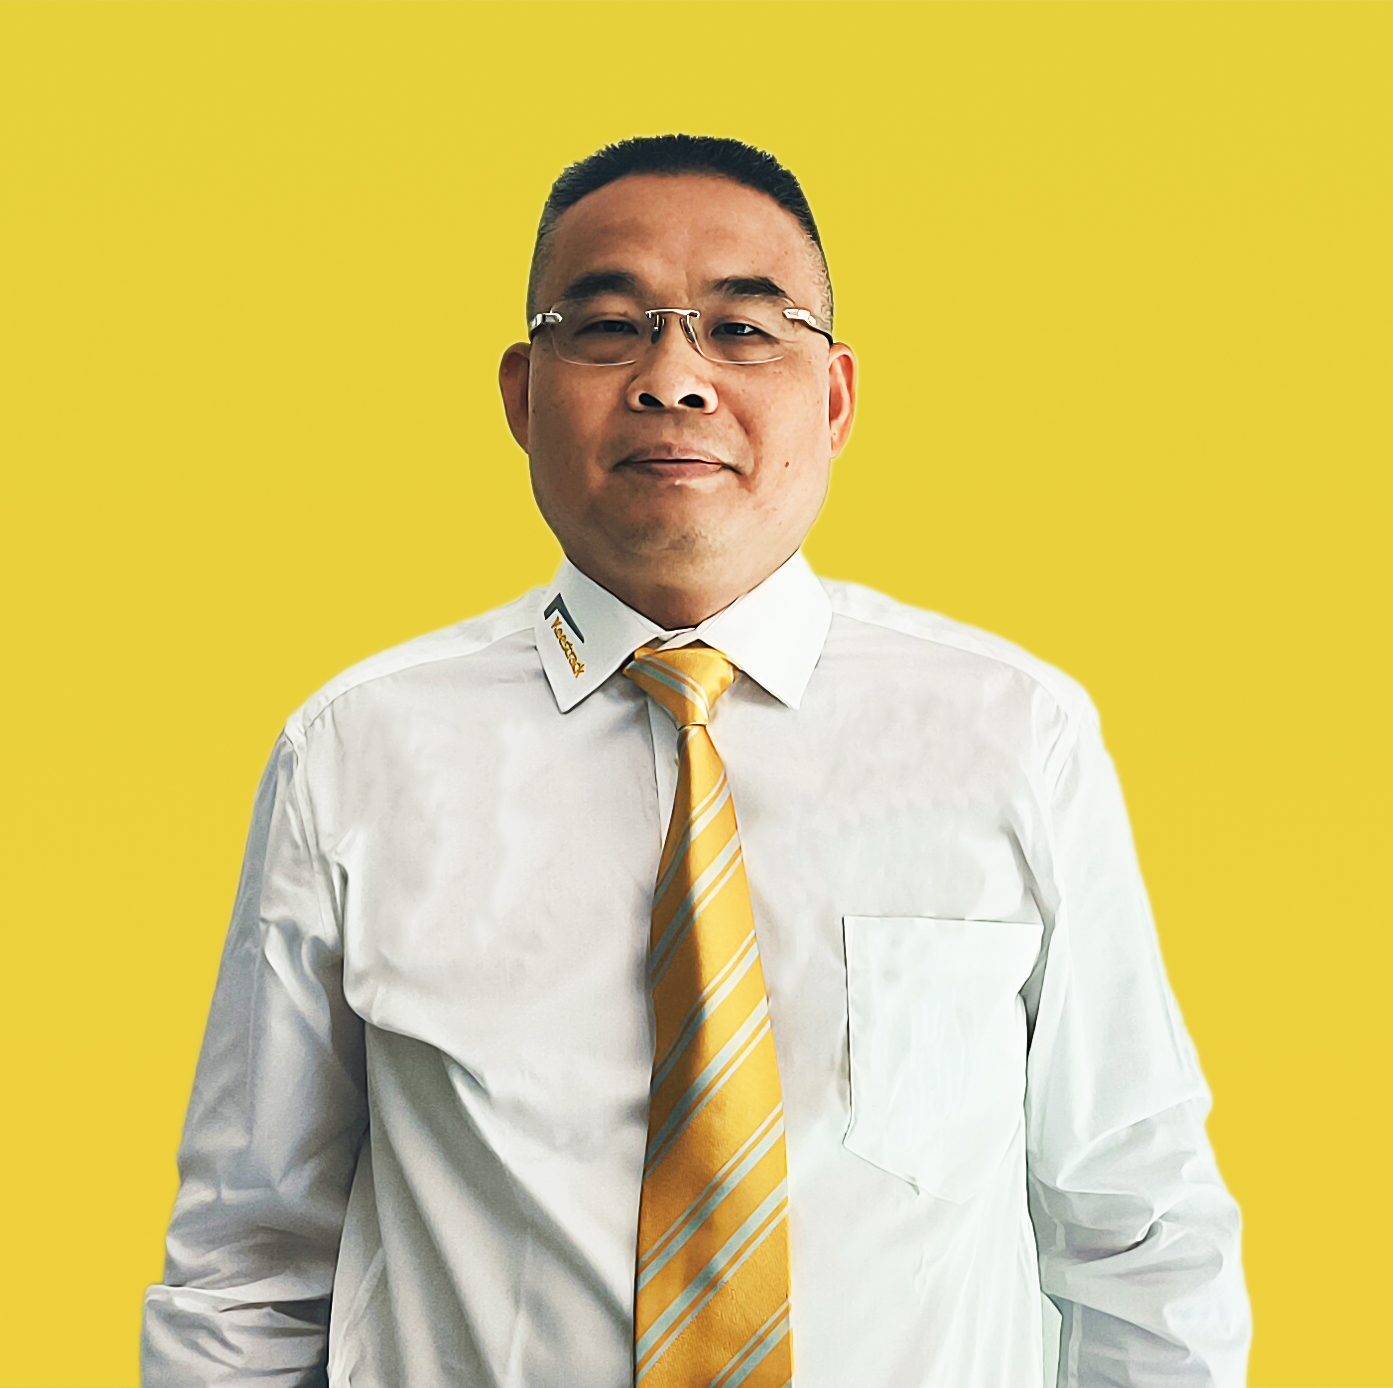 Richard Li, new MD of Keestrack Construction Equipment Co. in China.